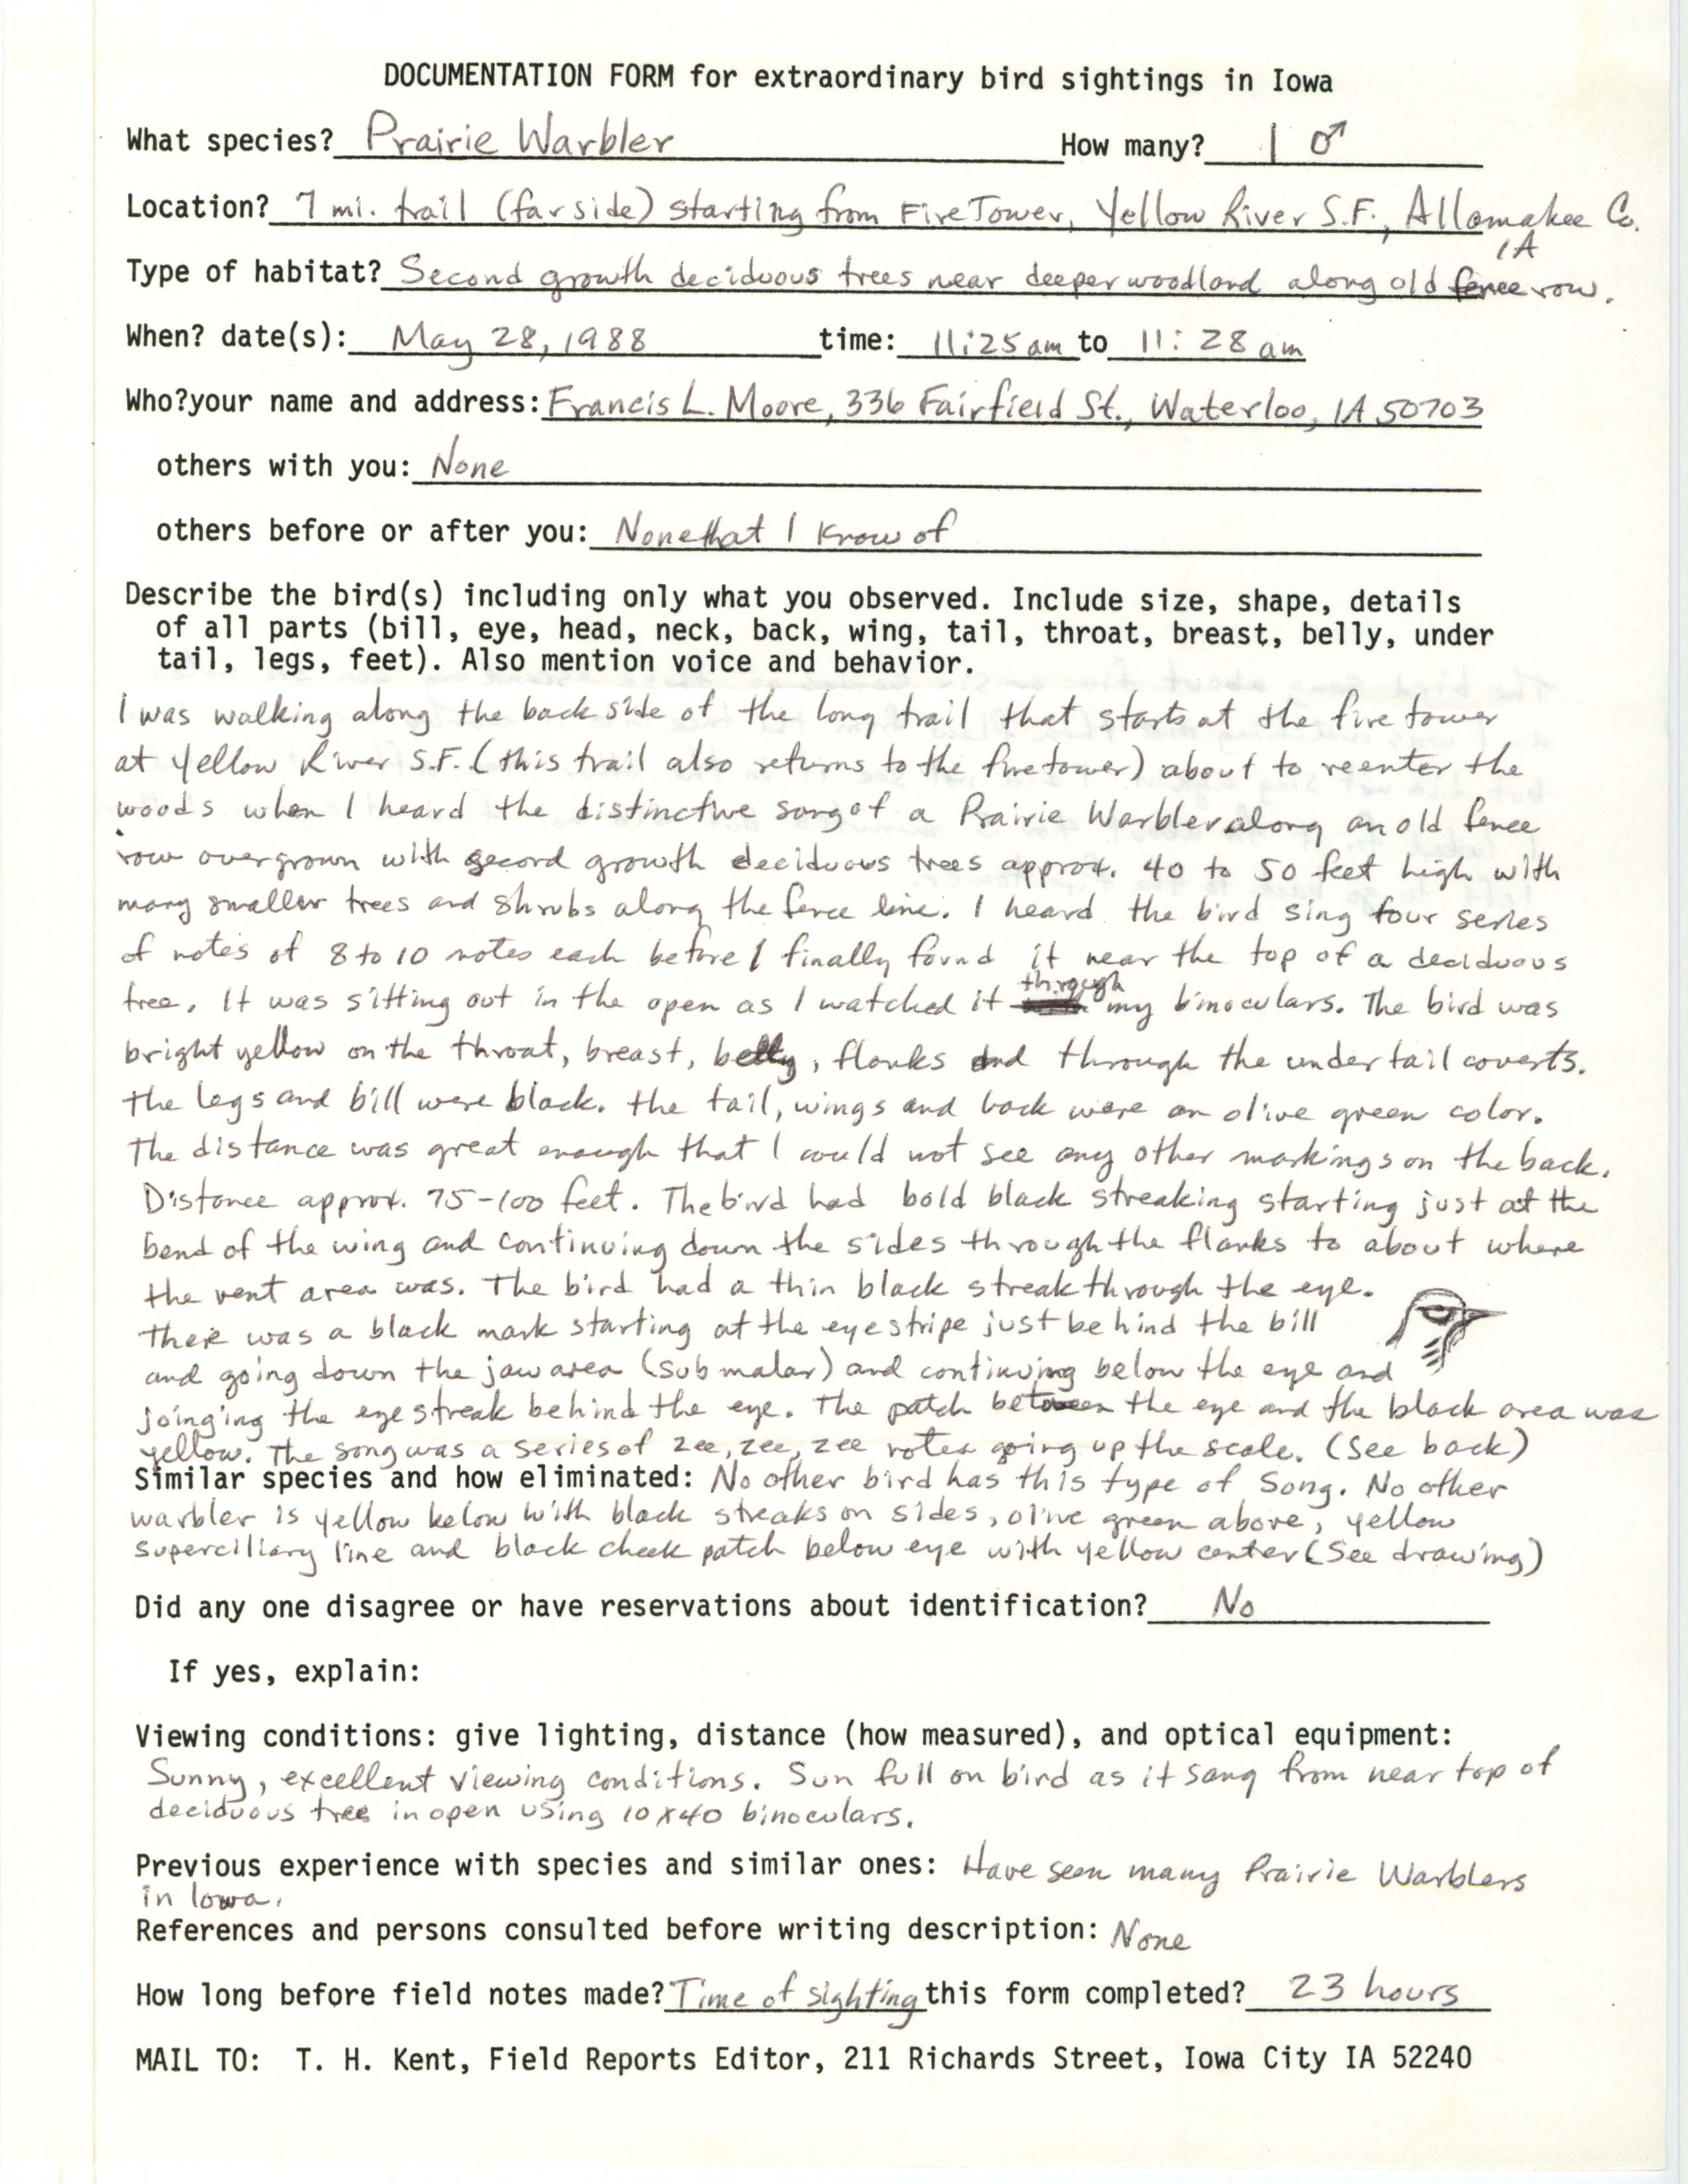 Rare bird documentation form for Prairie Warbler at Yellow River State Forest Trail, 1988